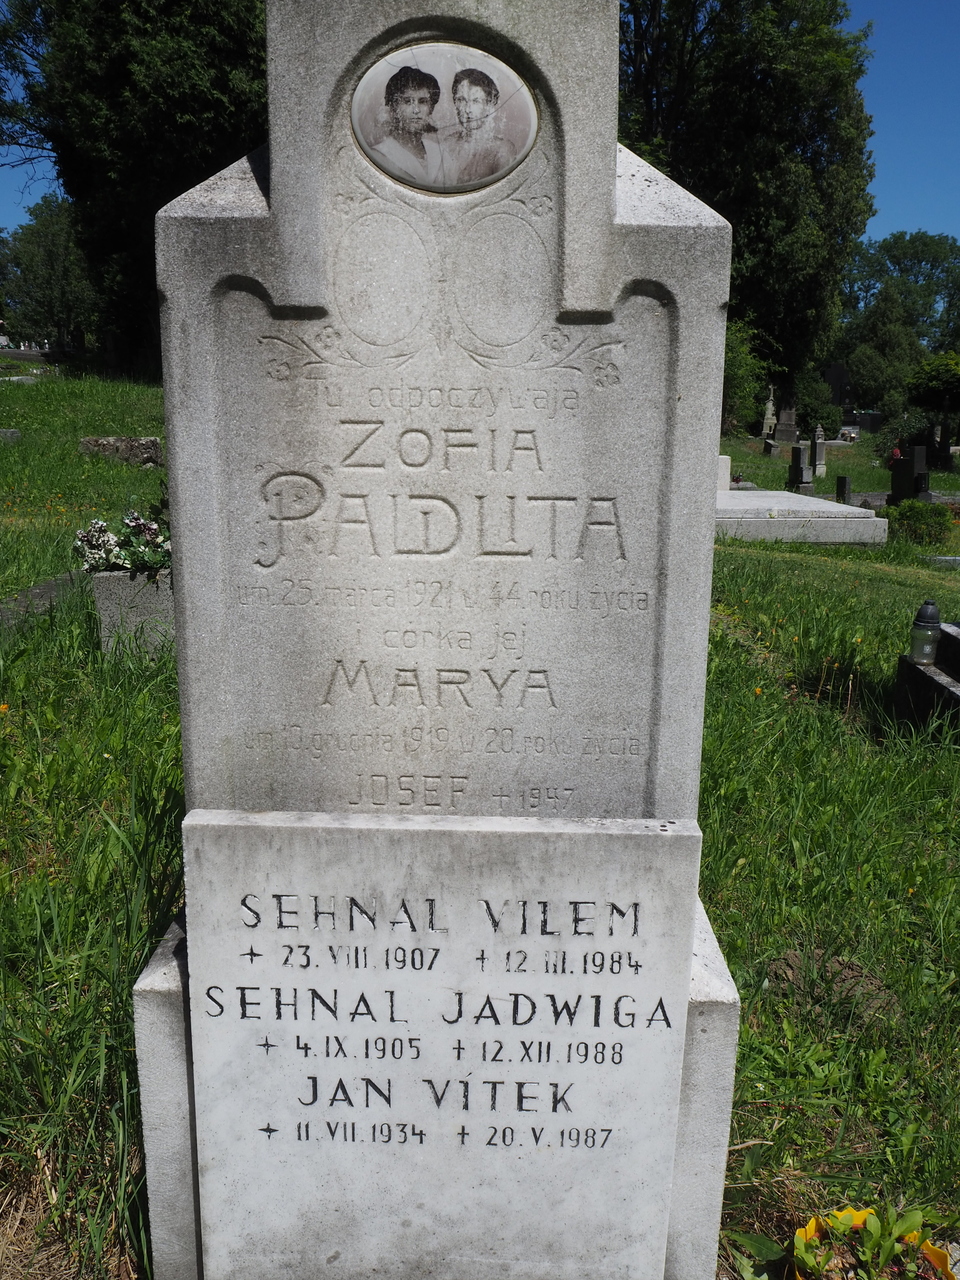 Fragment of a tombstone of the Paldlit family, Karviná Důl cemetery, as of 2022